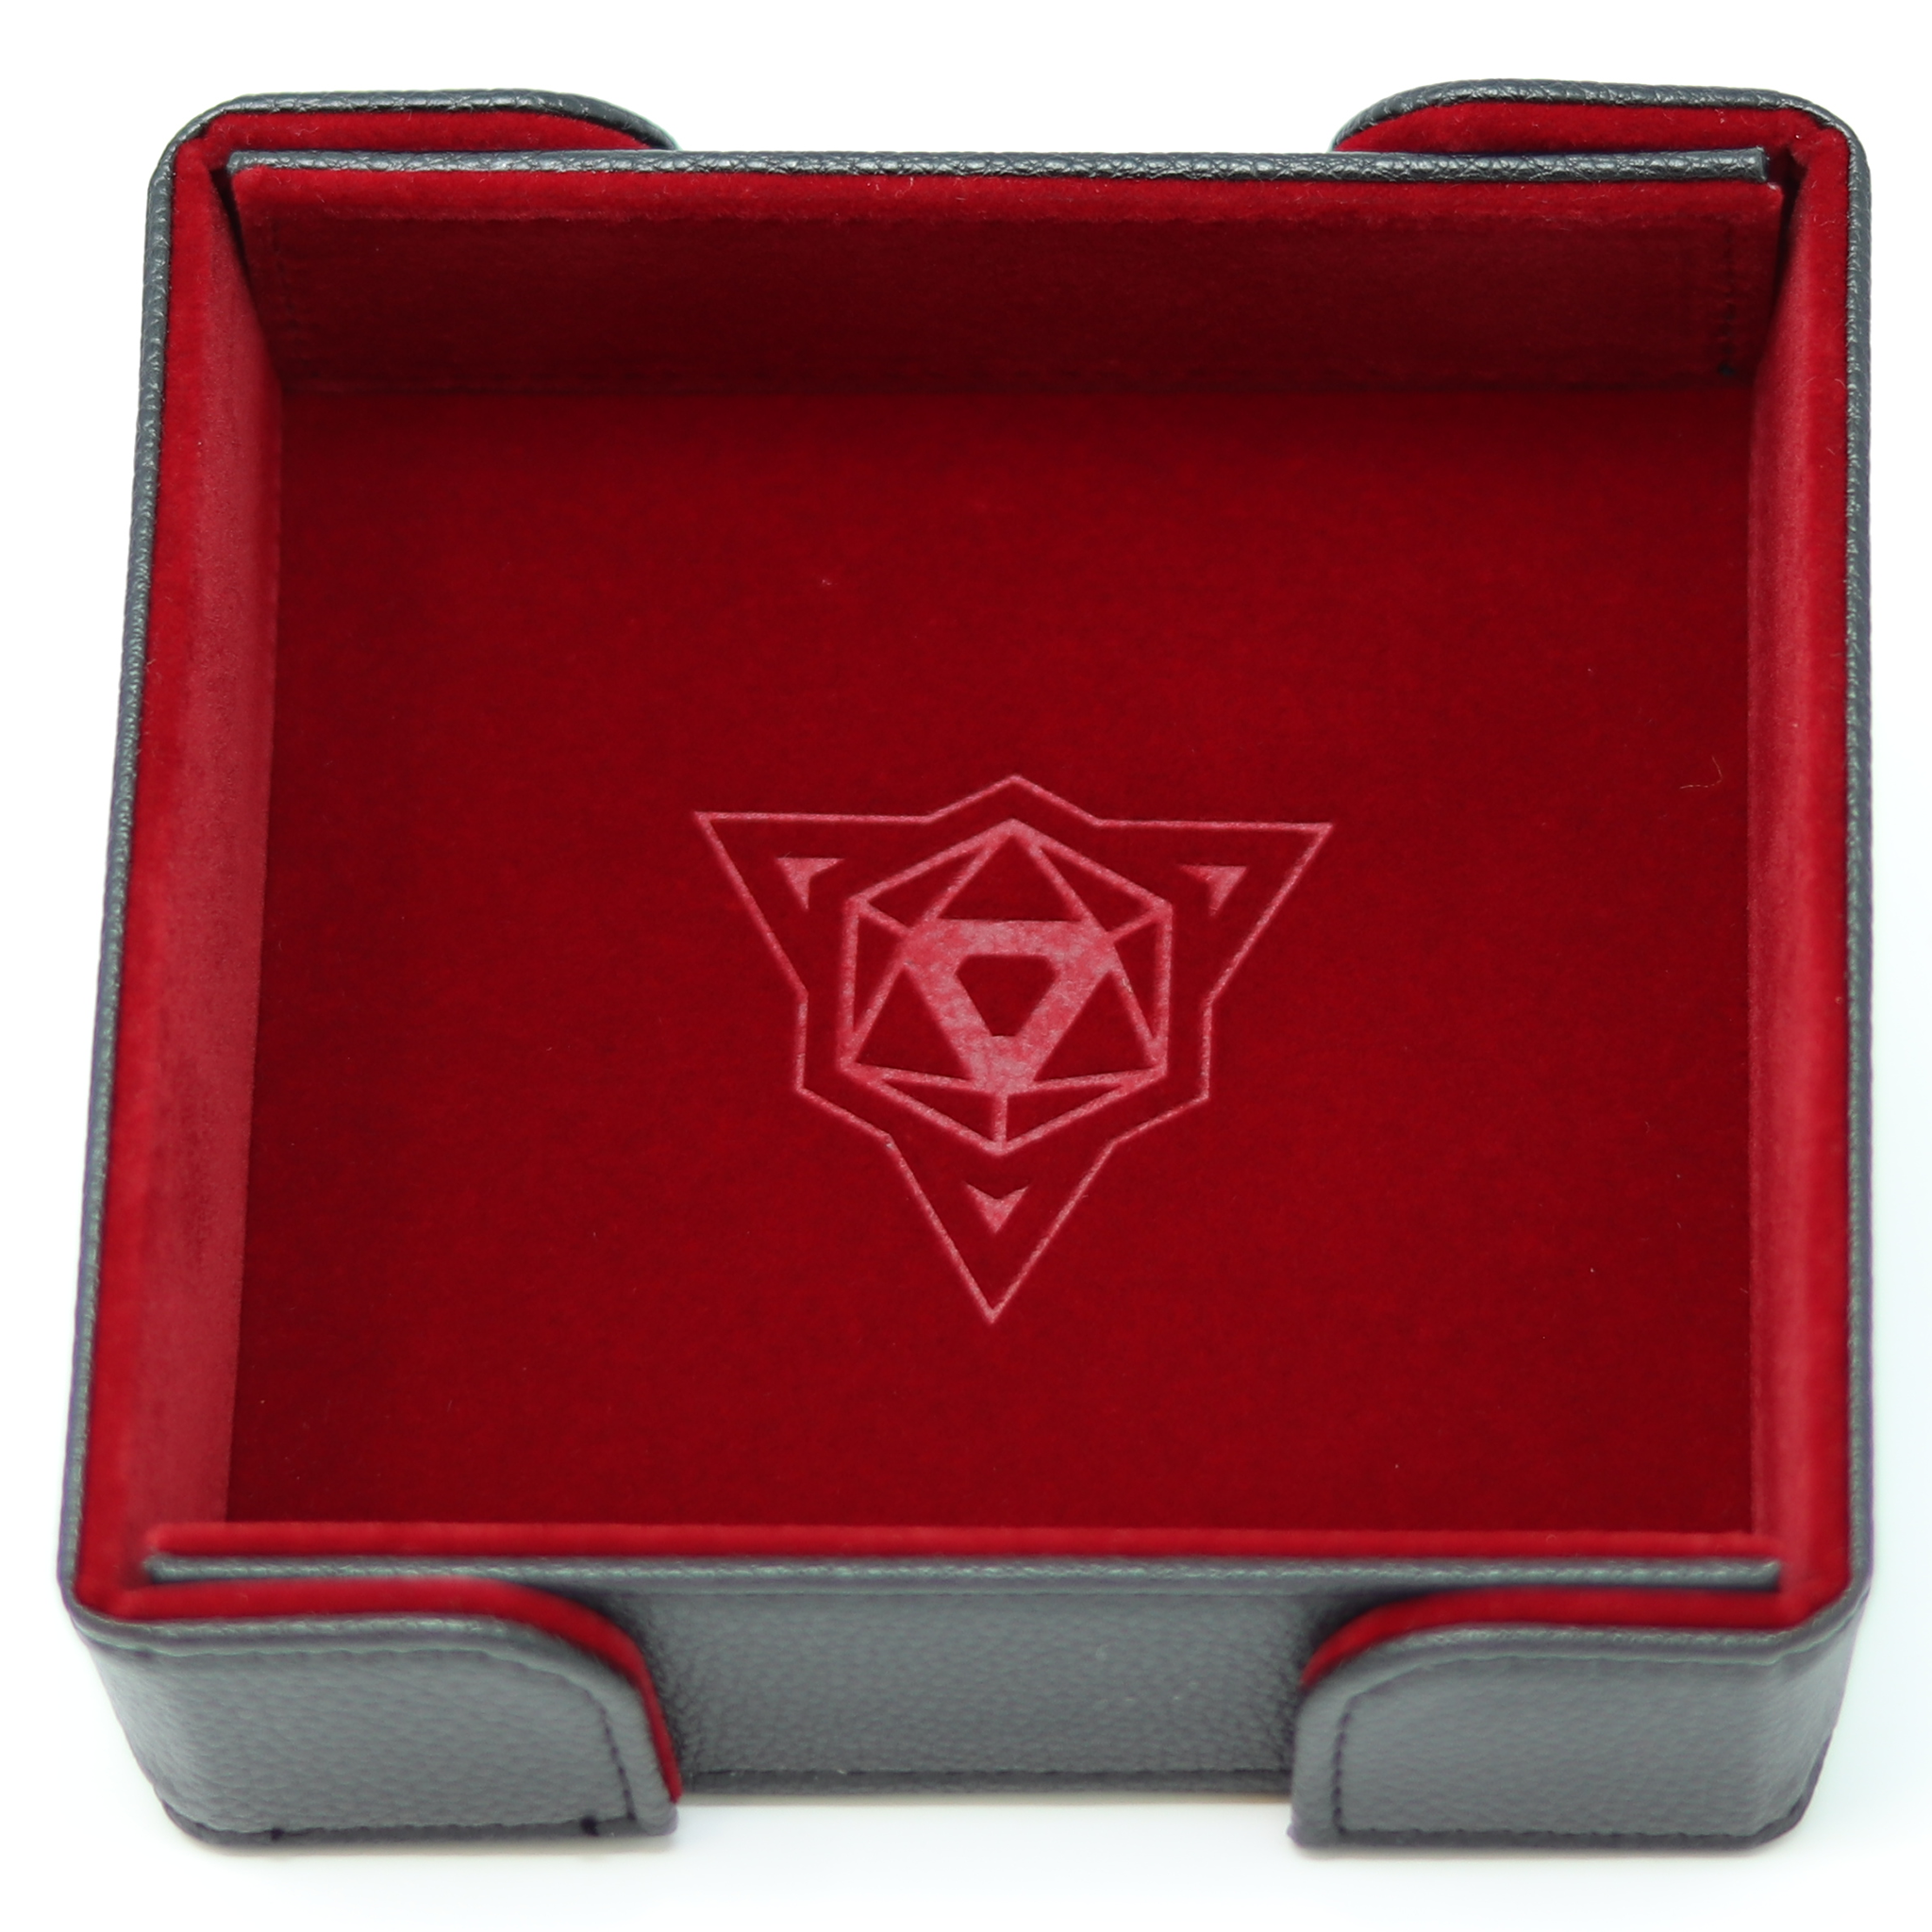 Die Hard Magnetic Square Tray w/ Red Velvet | Anubis Games and Hobby